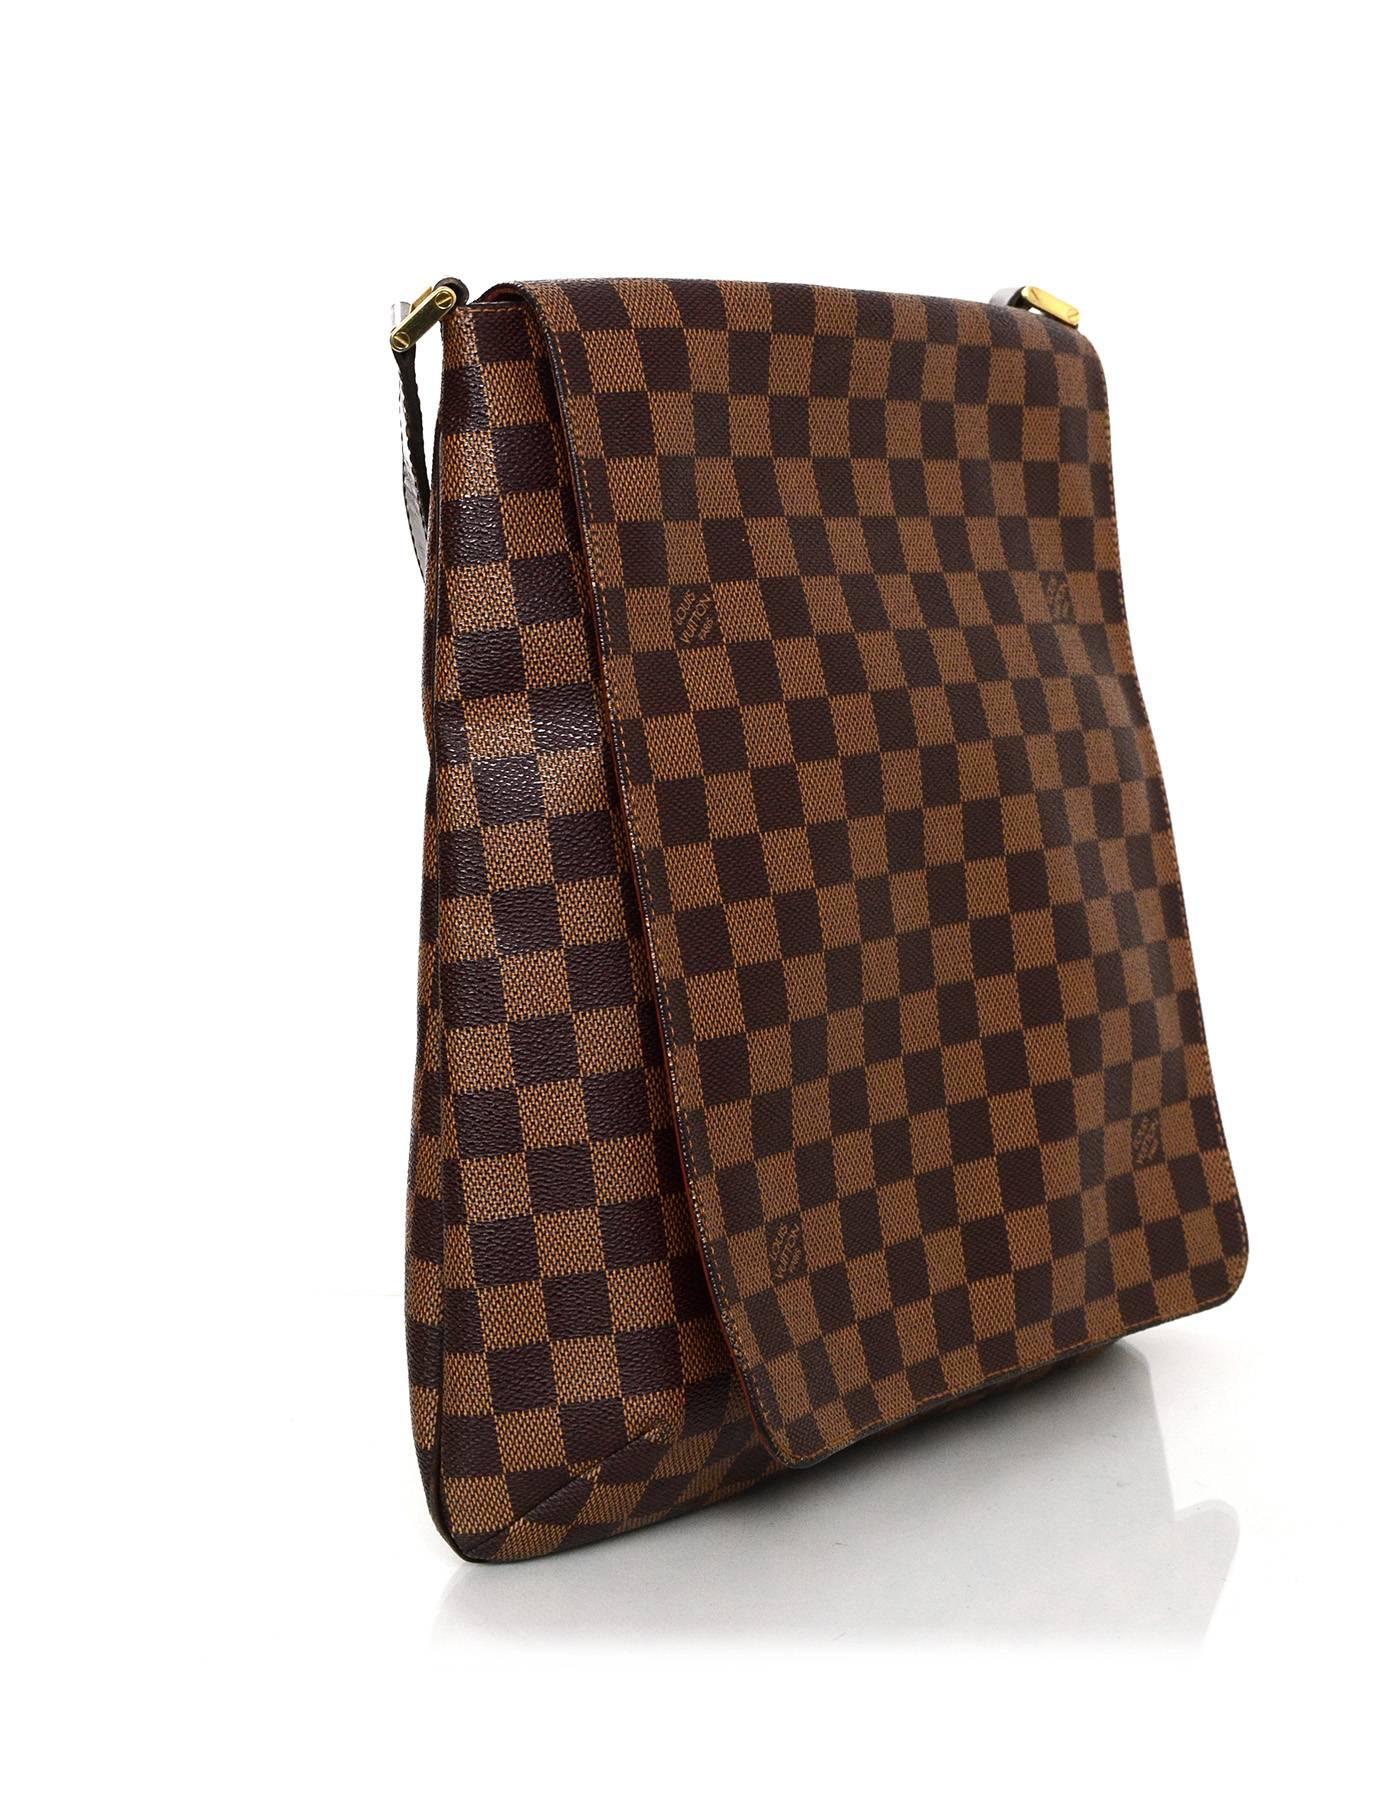 Louis Vuitton Damier Musette Salsa Messenger Bag
Features adjustable shoulder straps

Made In: France
Year of Production: 2004
Color: Brown 
Hardware: Goldtone
Materials: Coated canvas and leather
Lining: Rust microfiber and coated